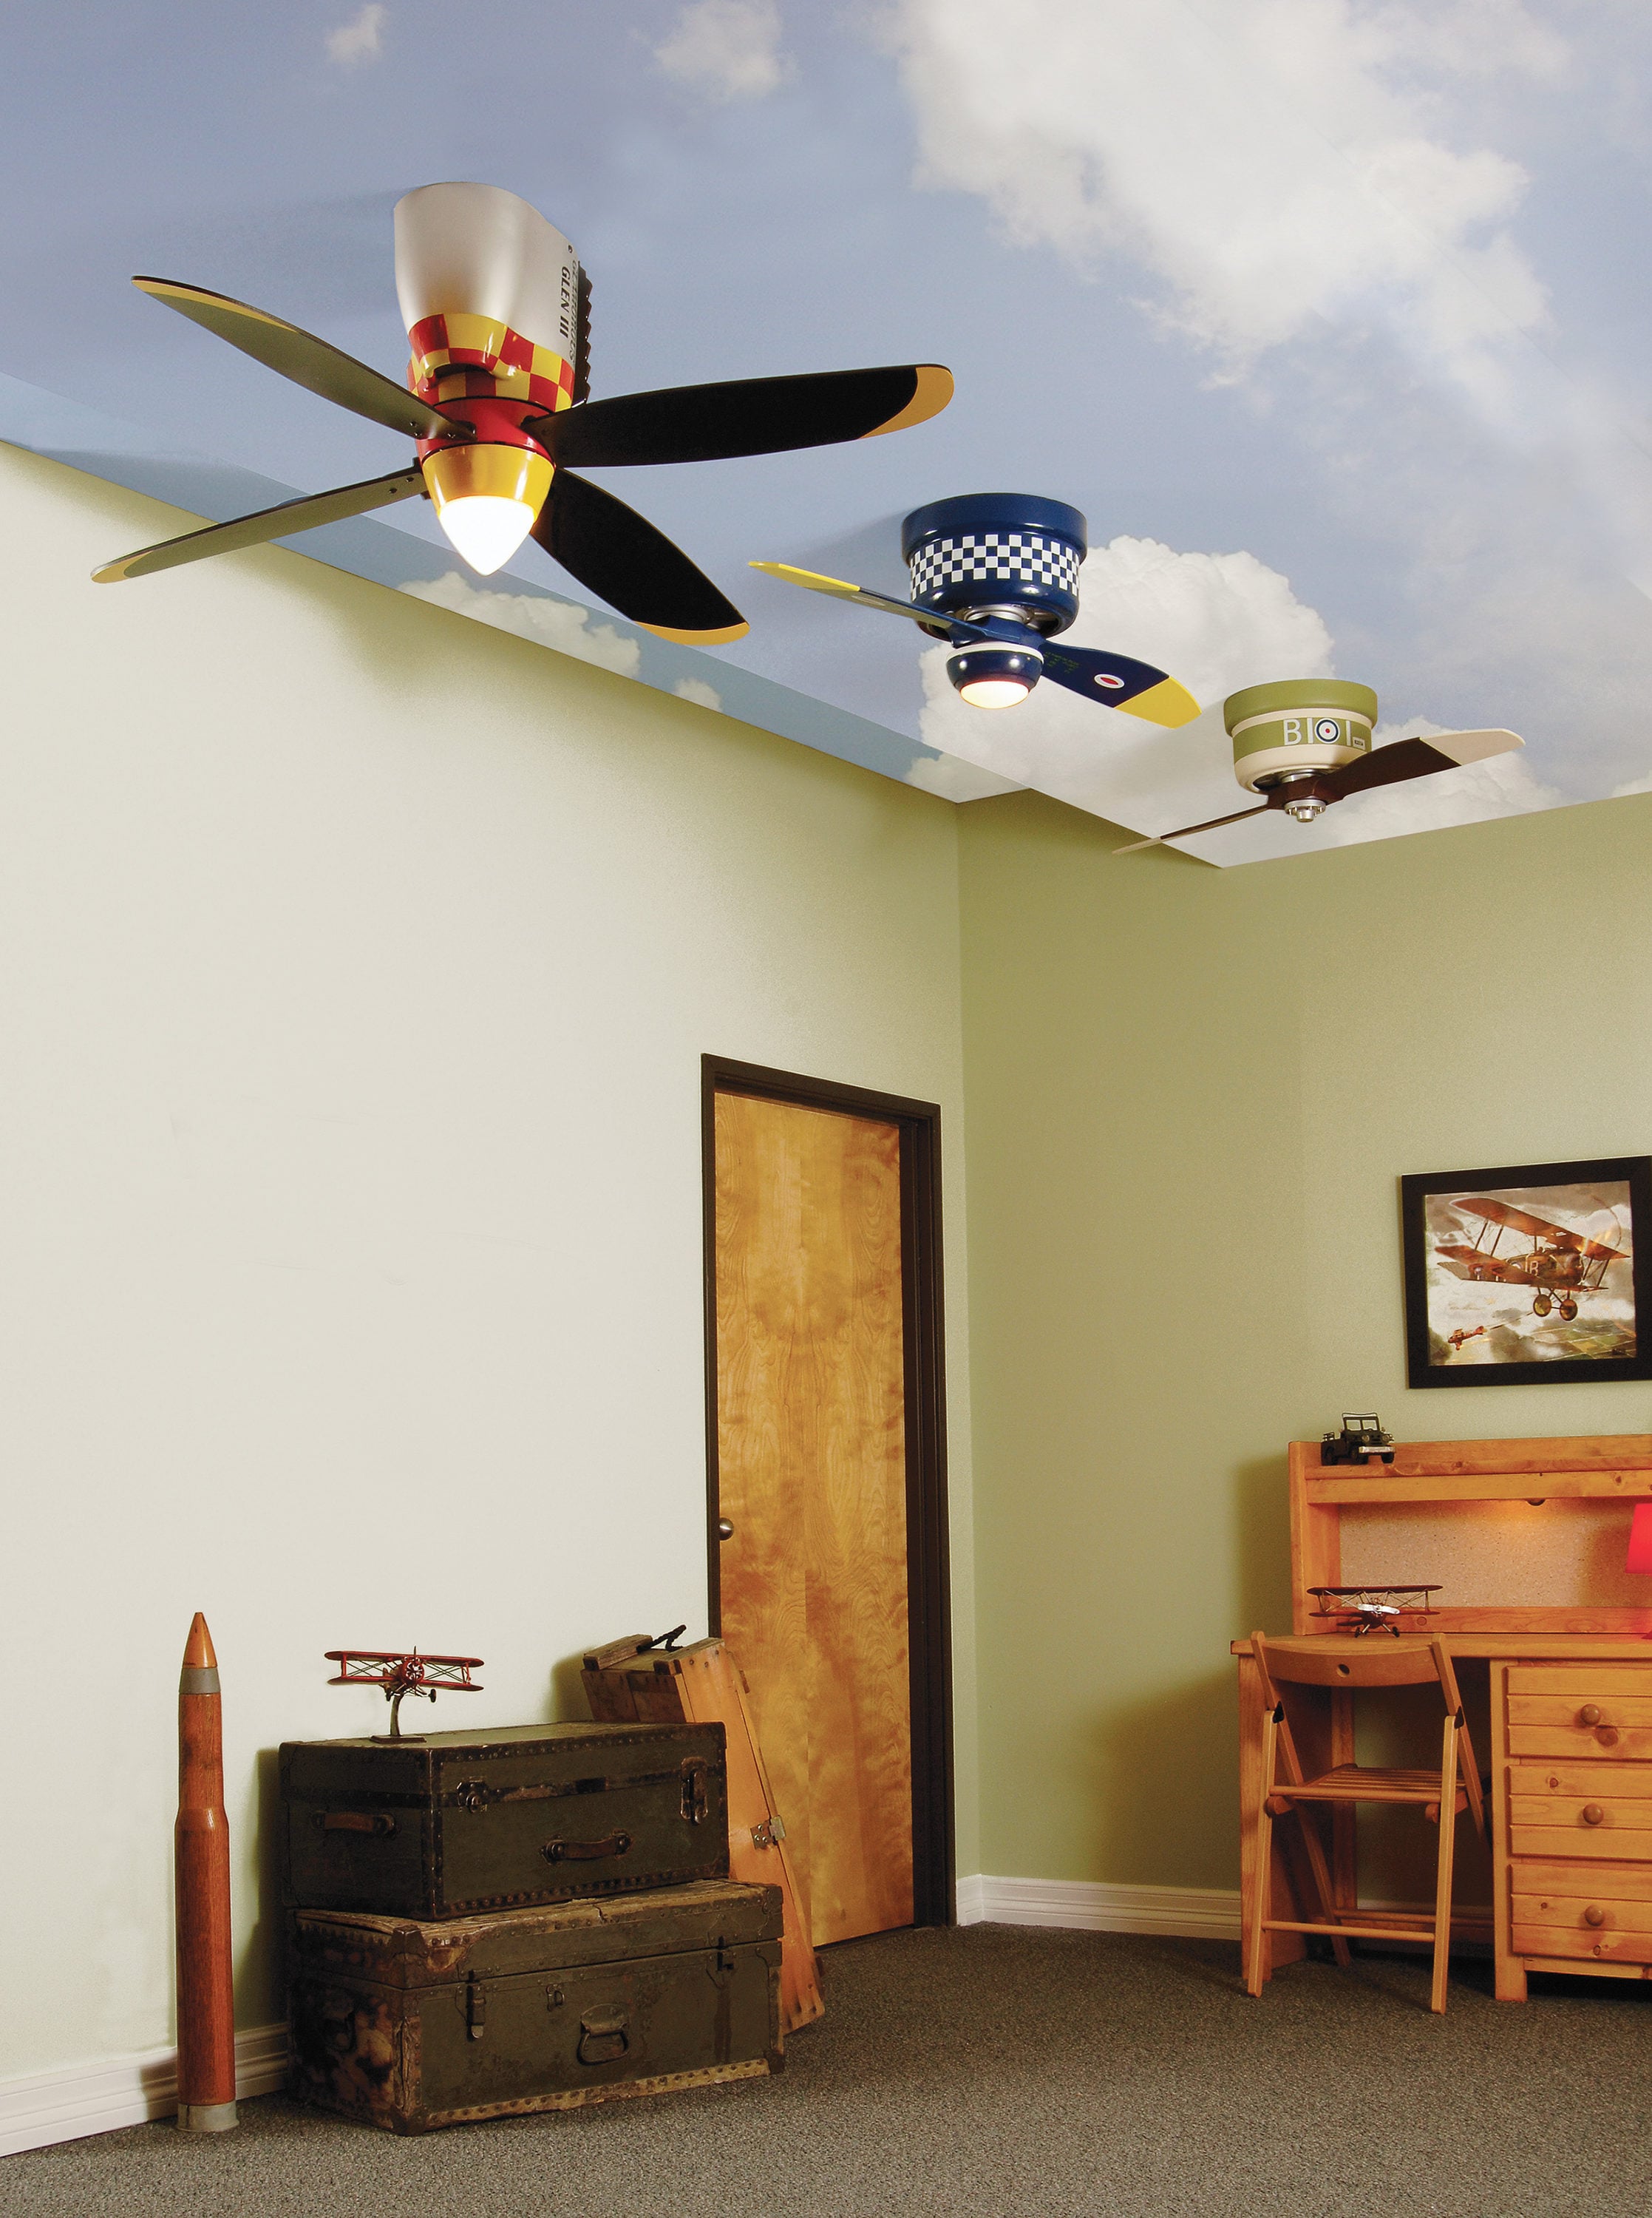 Craftmade WB348TS3 Warplanes 48 Inch Ceiling Fan 3 Blades Included in Tiger Shark With Cased White Glass for sale online 